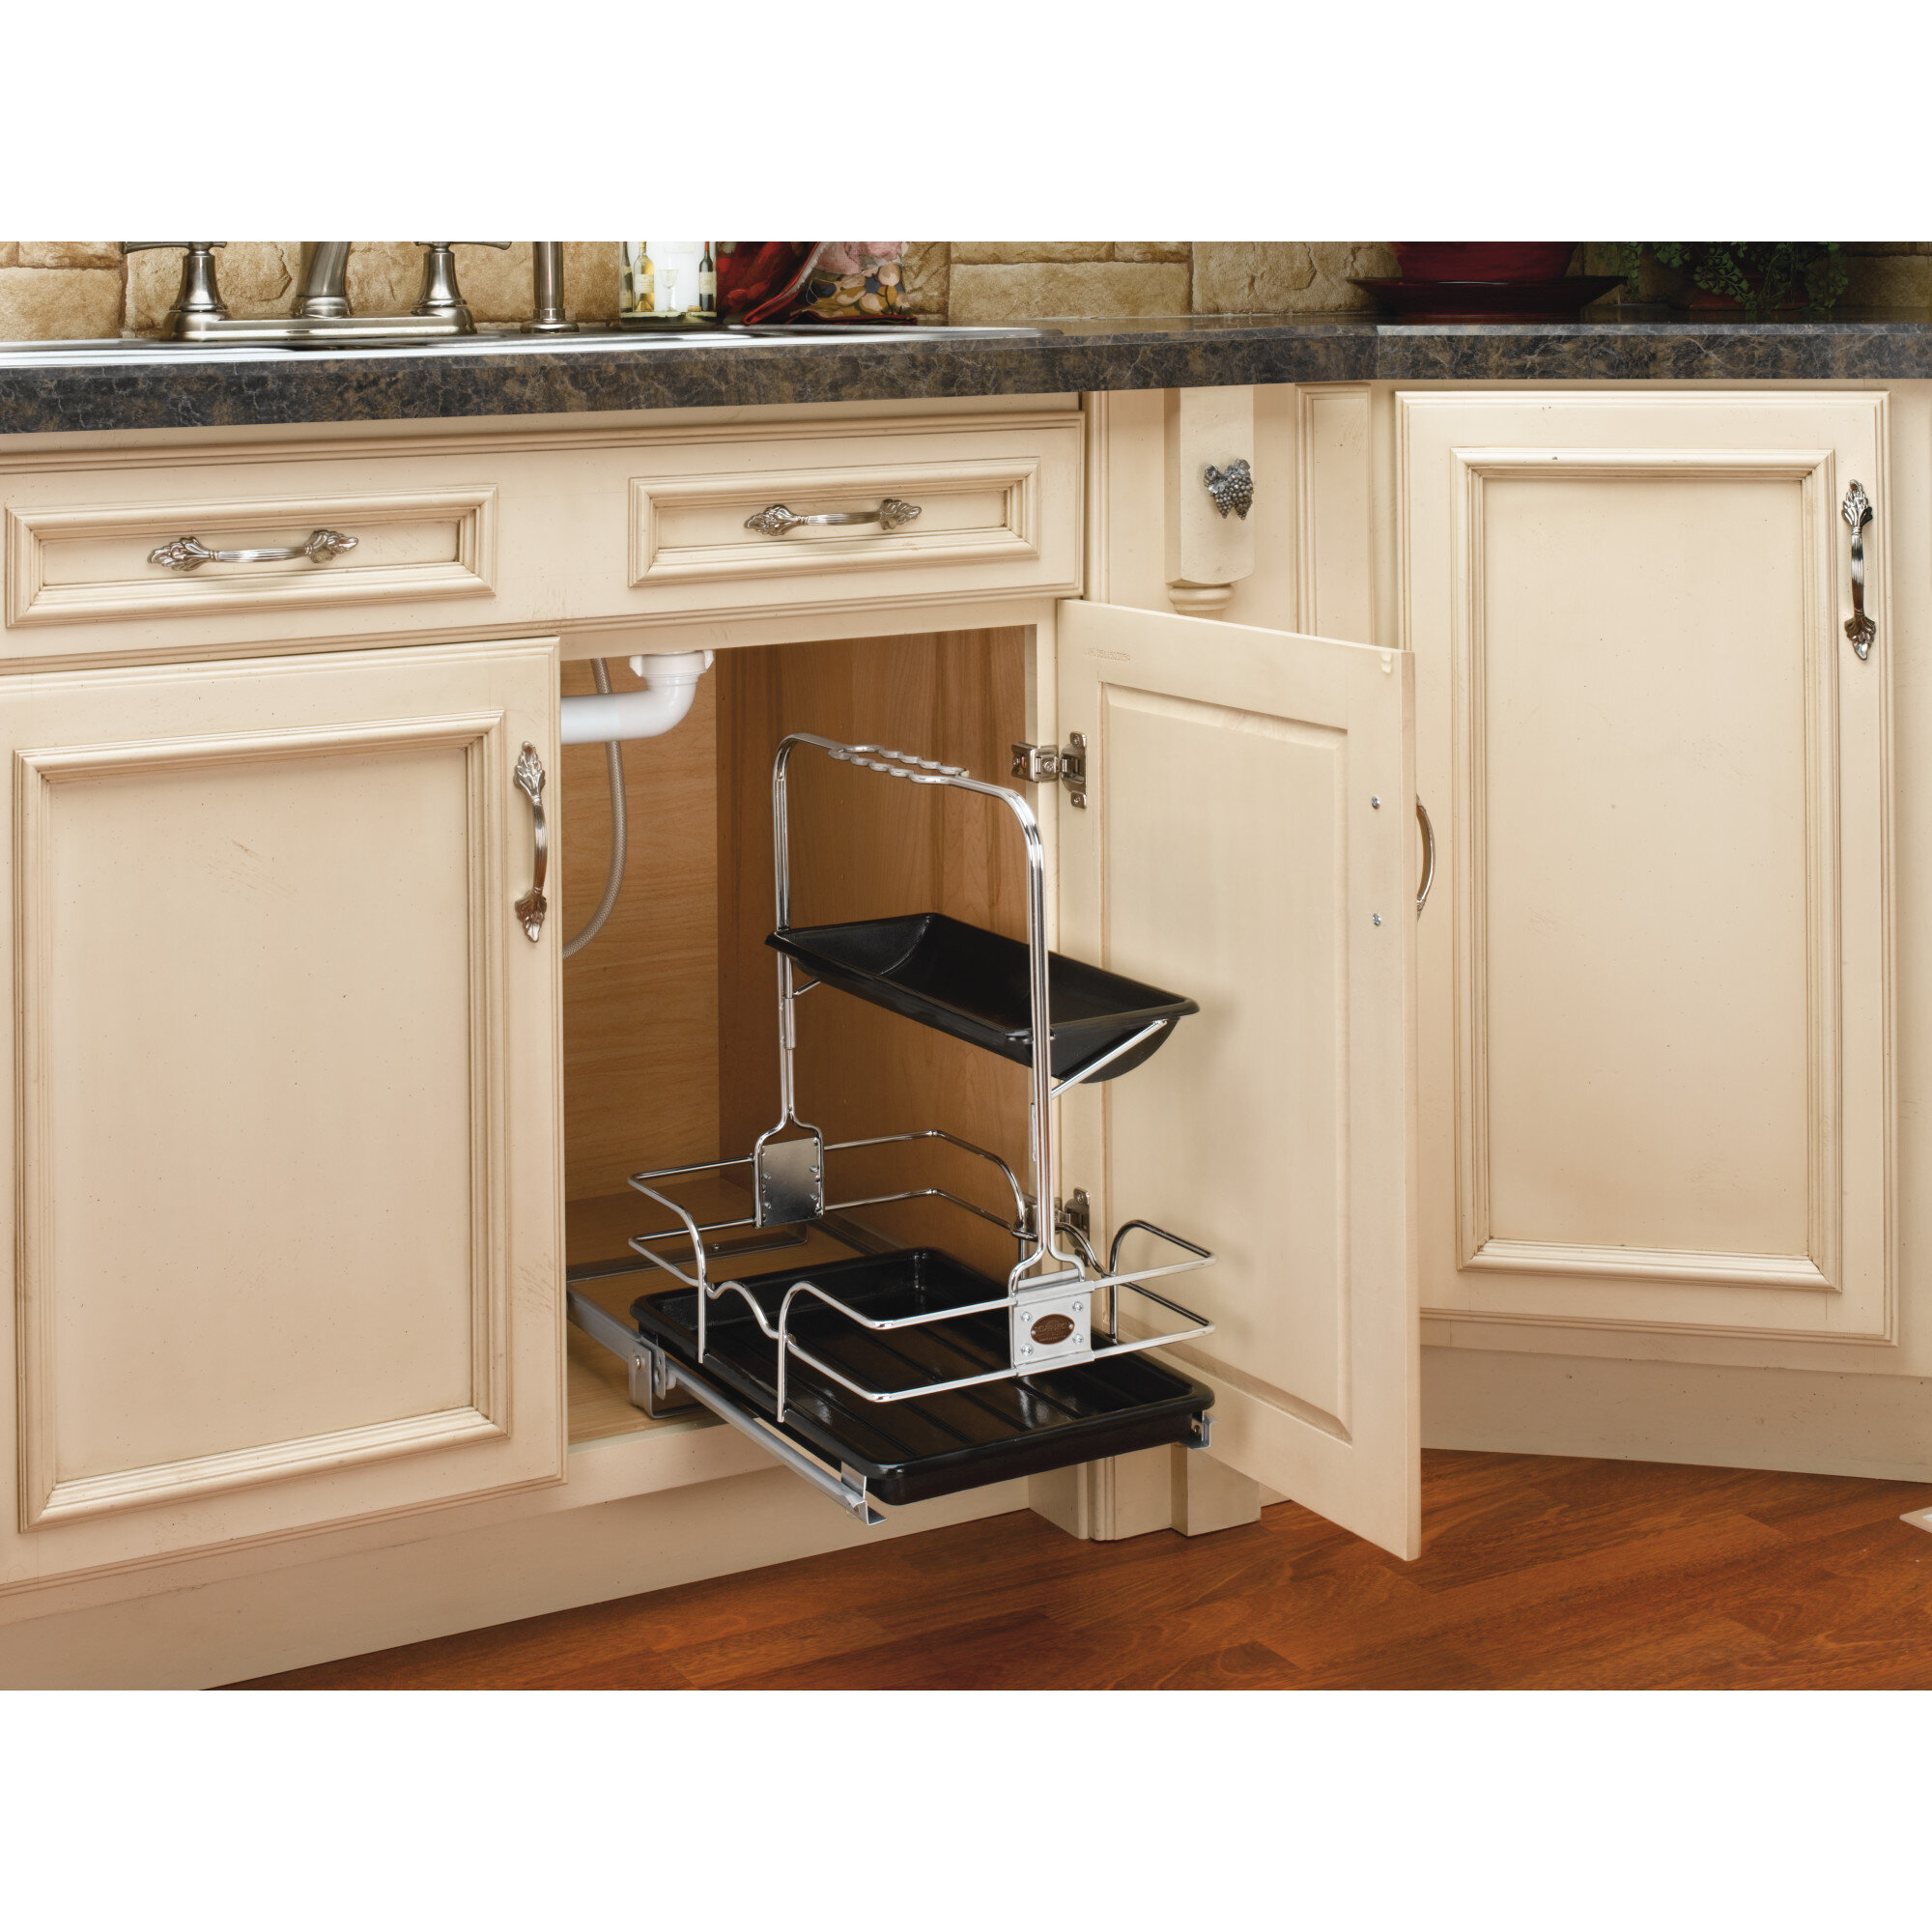 Rev-a-Shelf Tip-out Undersink Drawer - Installation and Review 